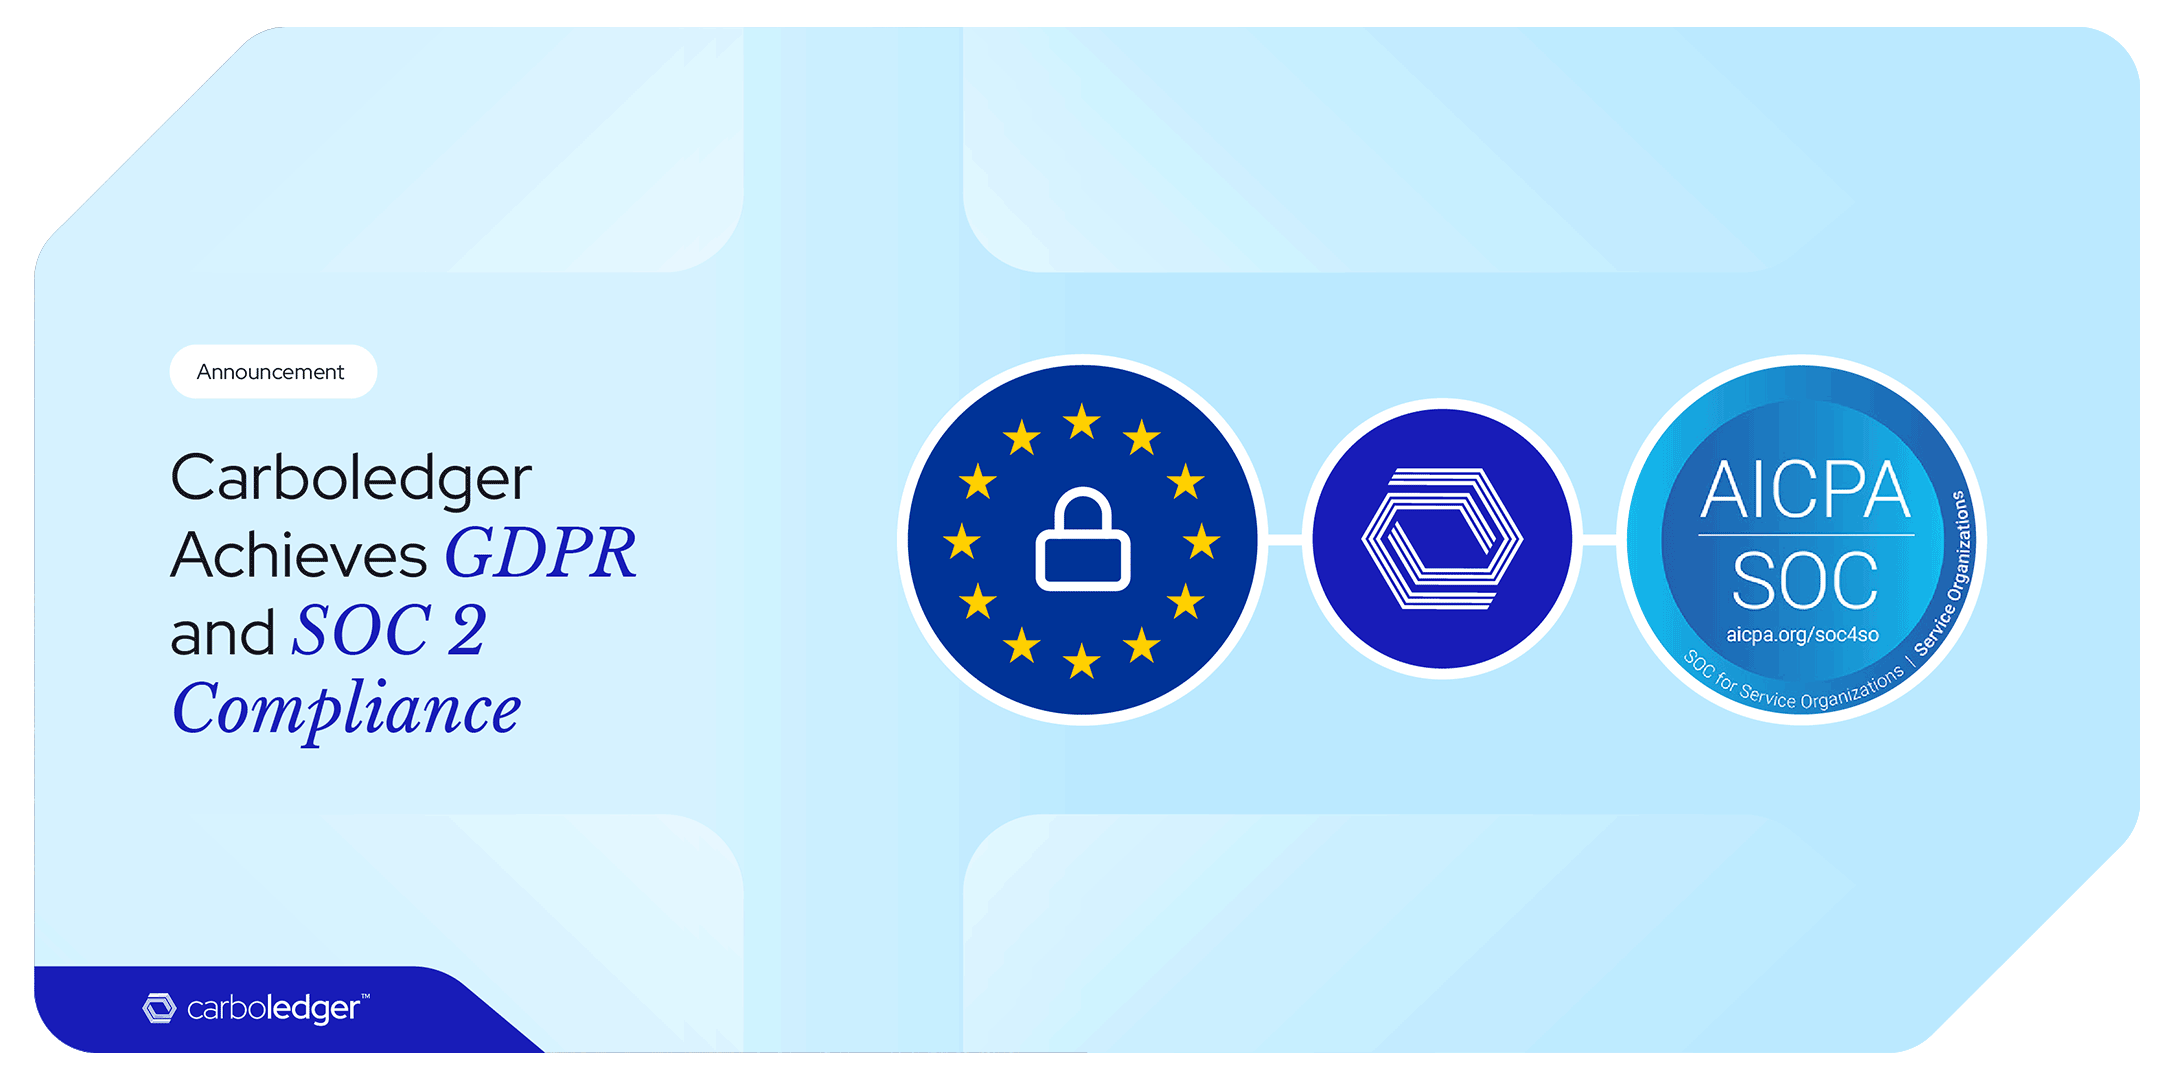 Carboledger Achieves GDPR and SOC 2 Compliance